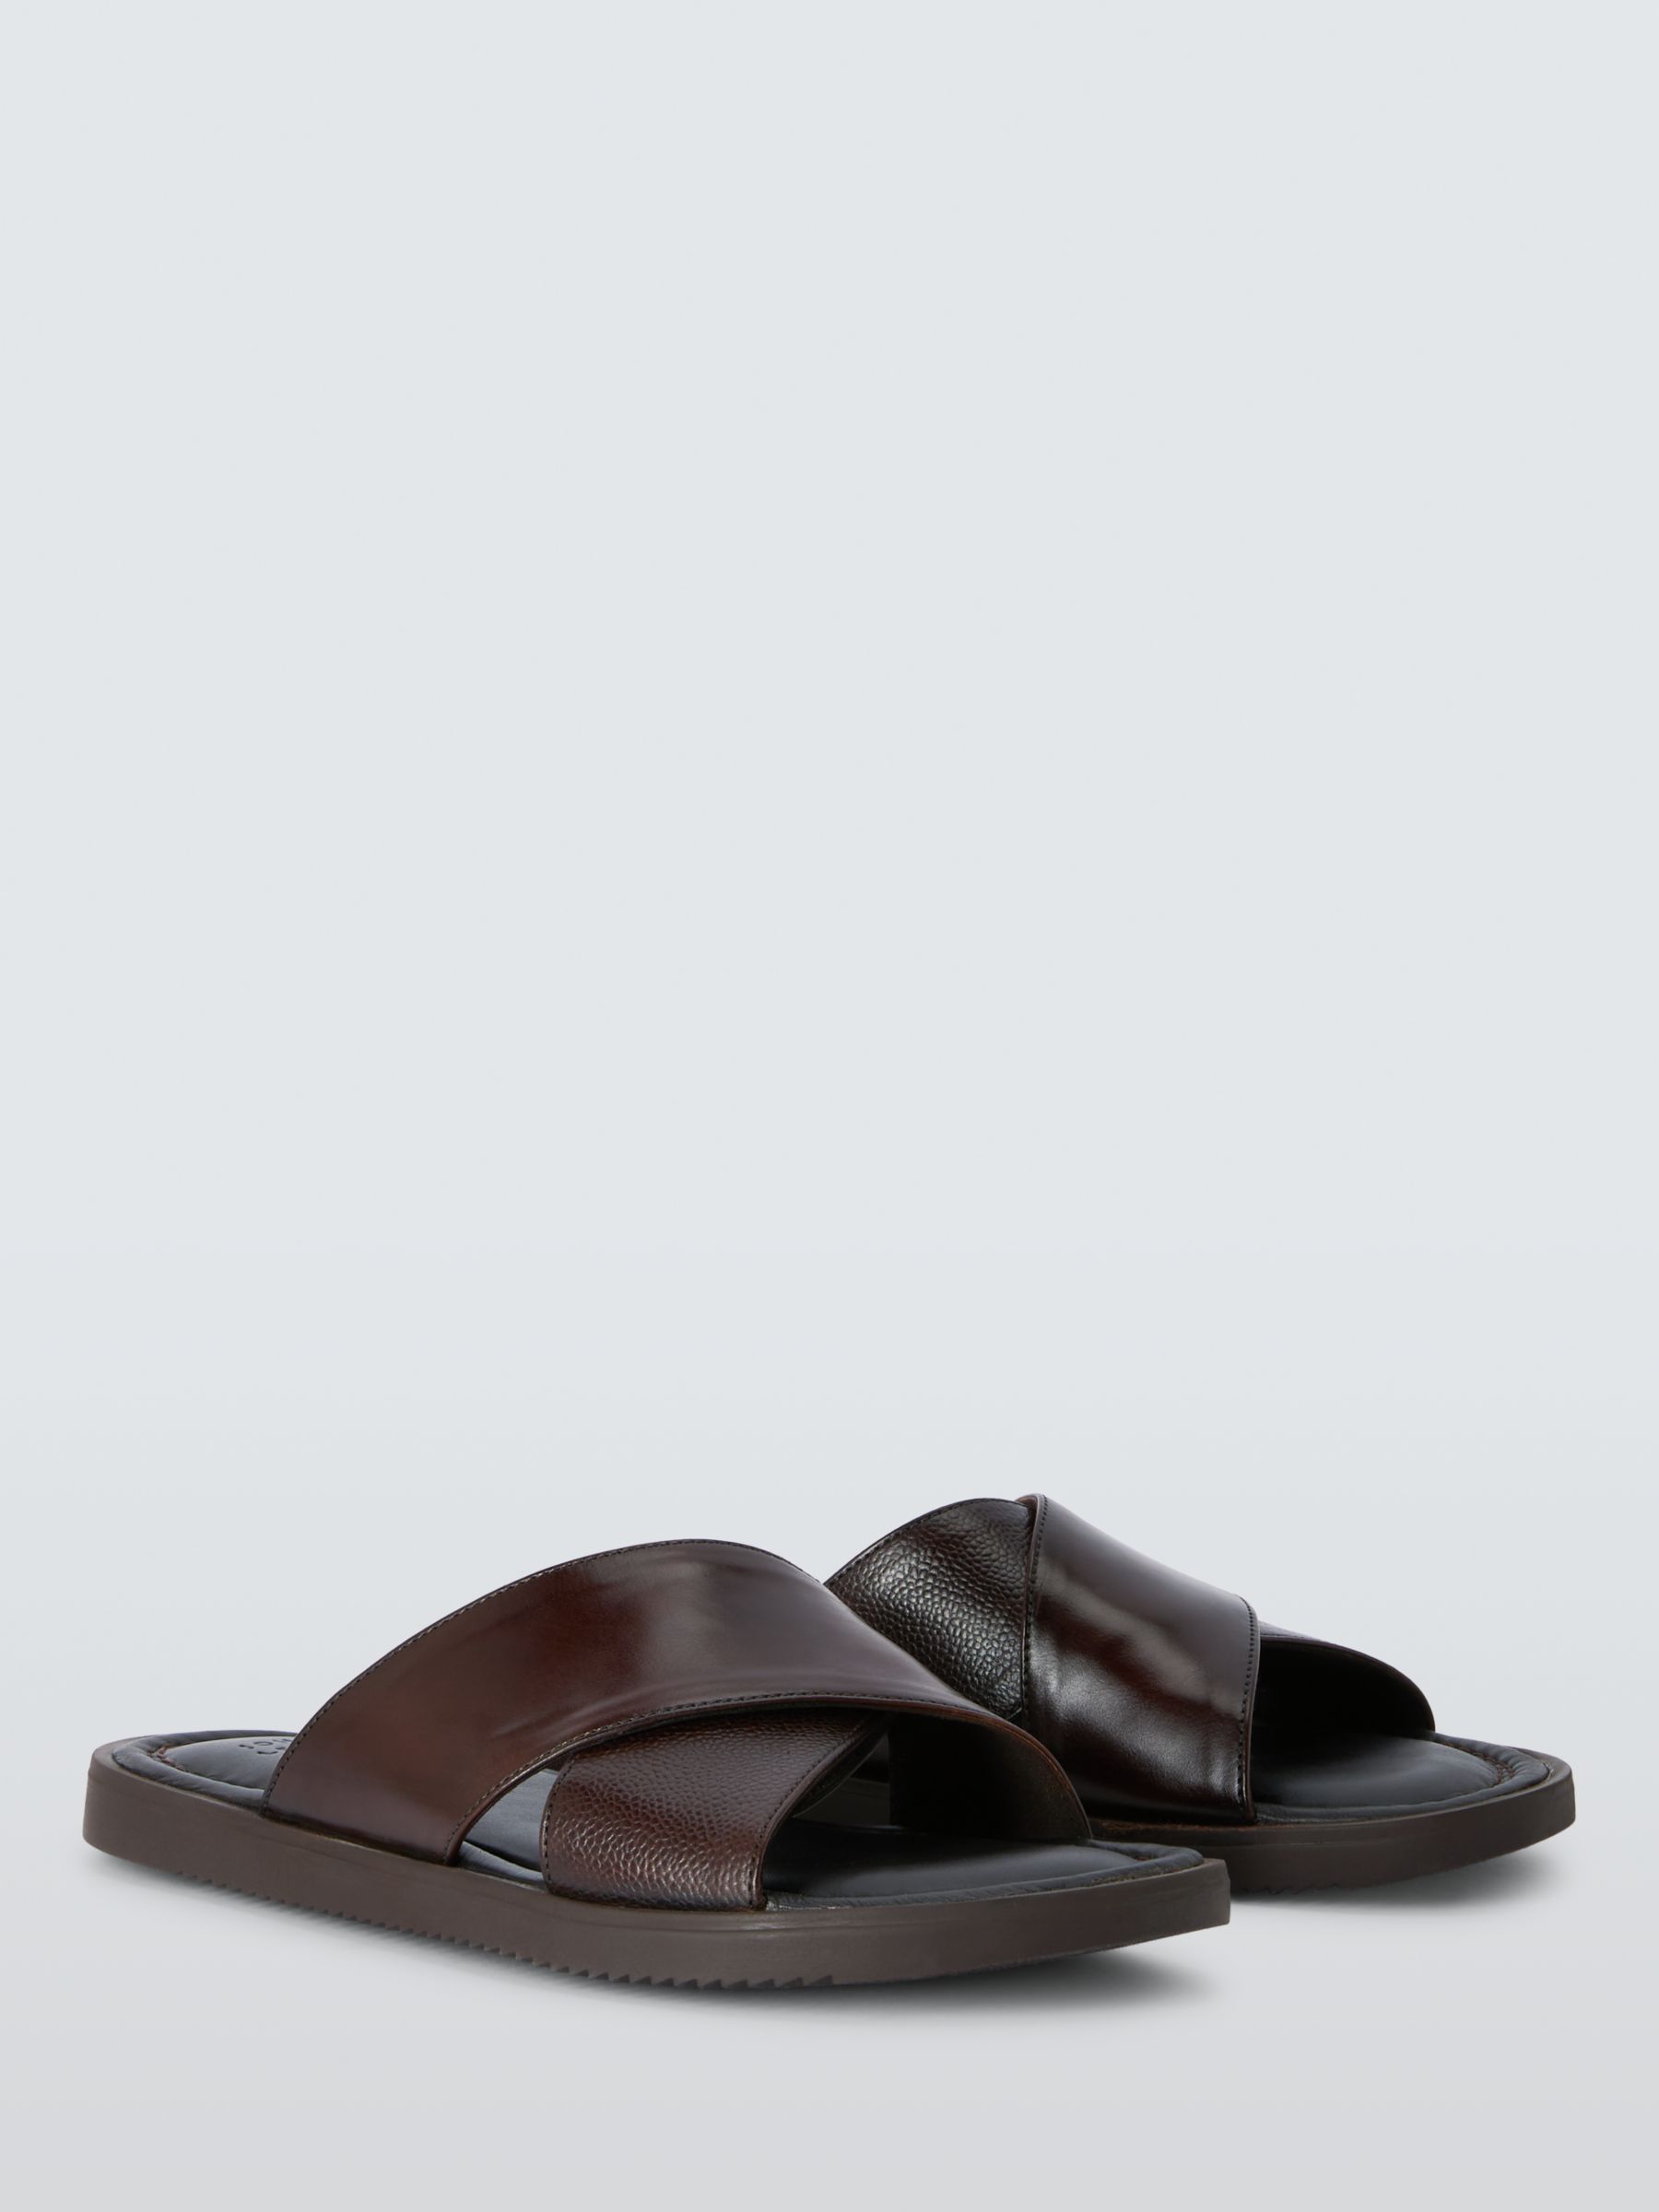 John Lewis Leather Cross Strap Sandals, Brown, 7